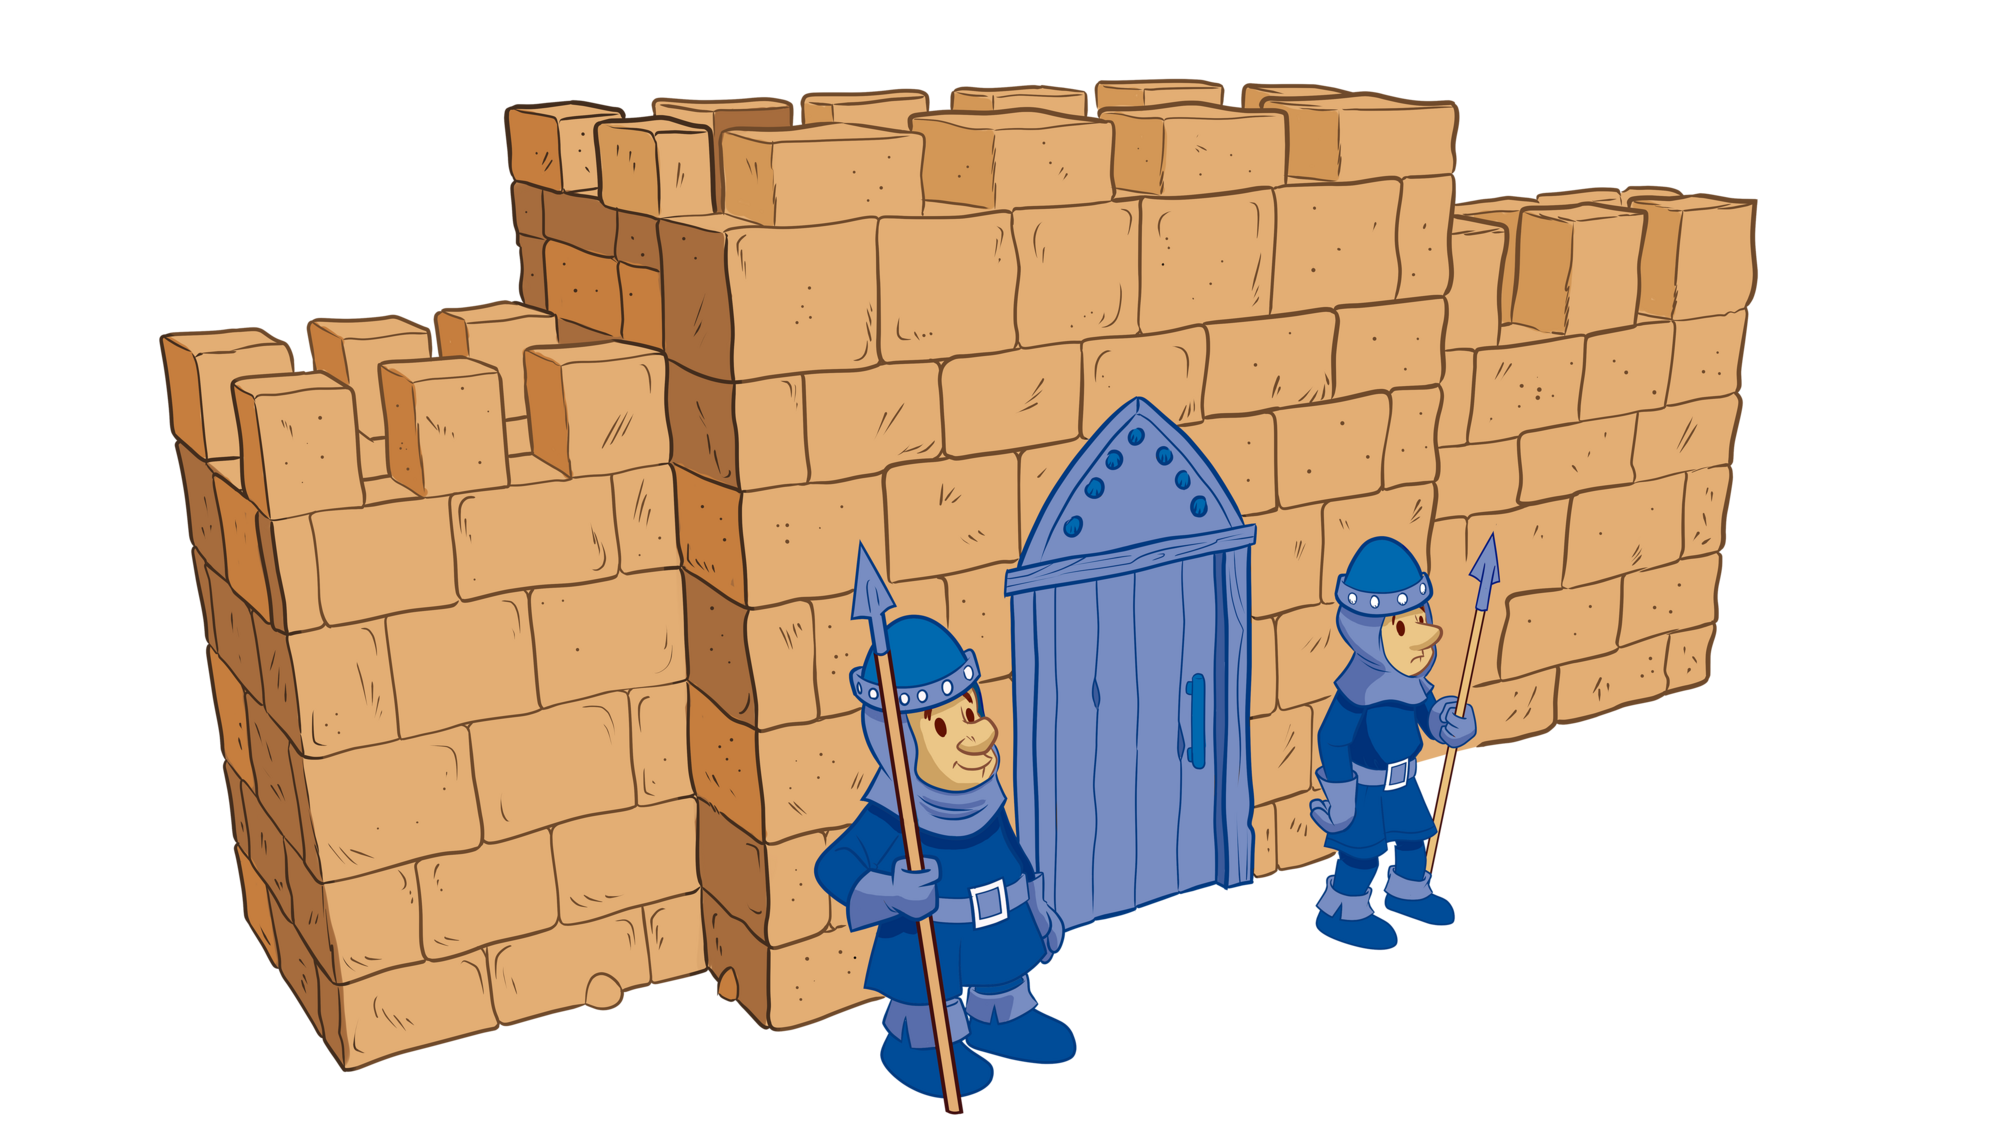 A fortification wall, with archer holes, and two soldiers guarding the main gate